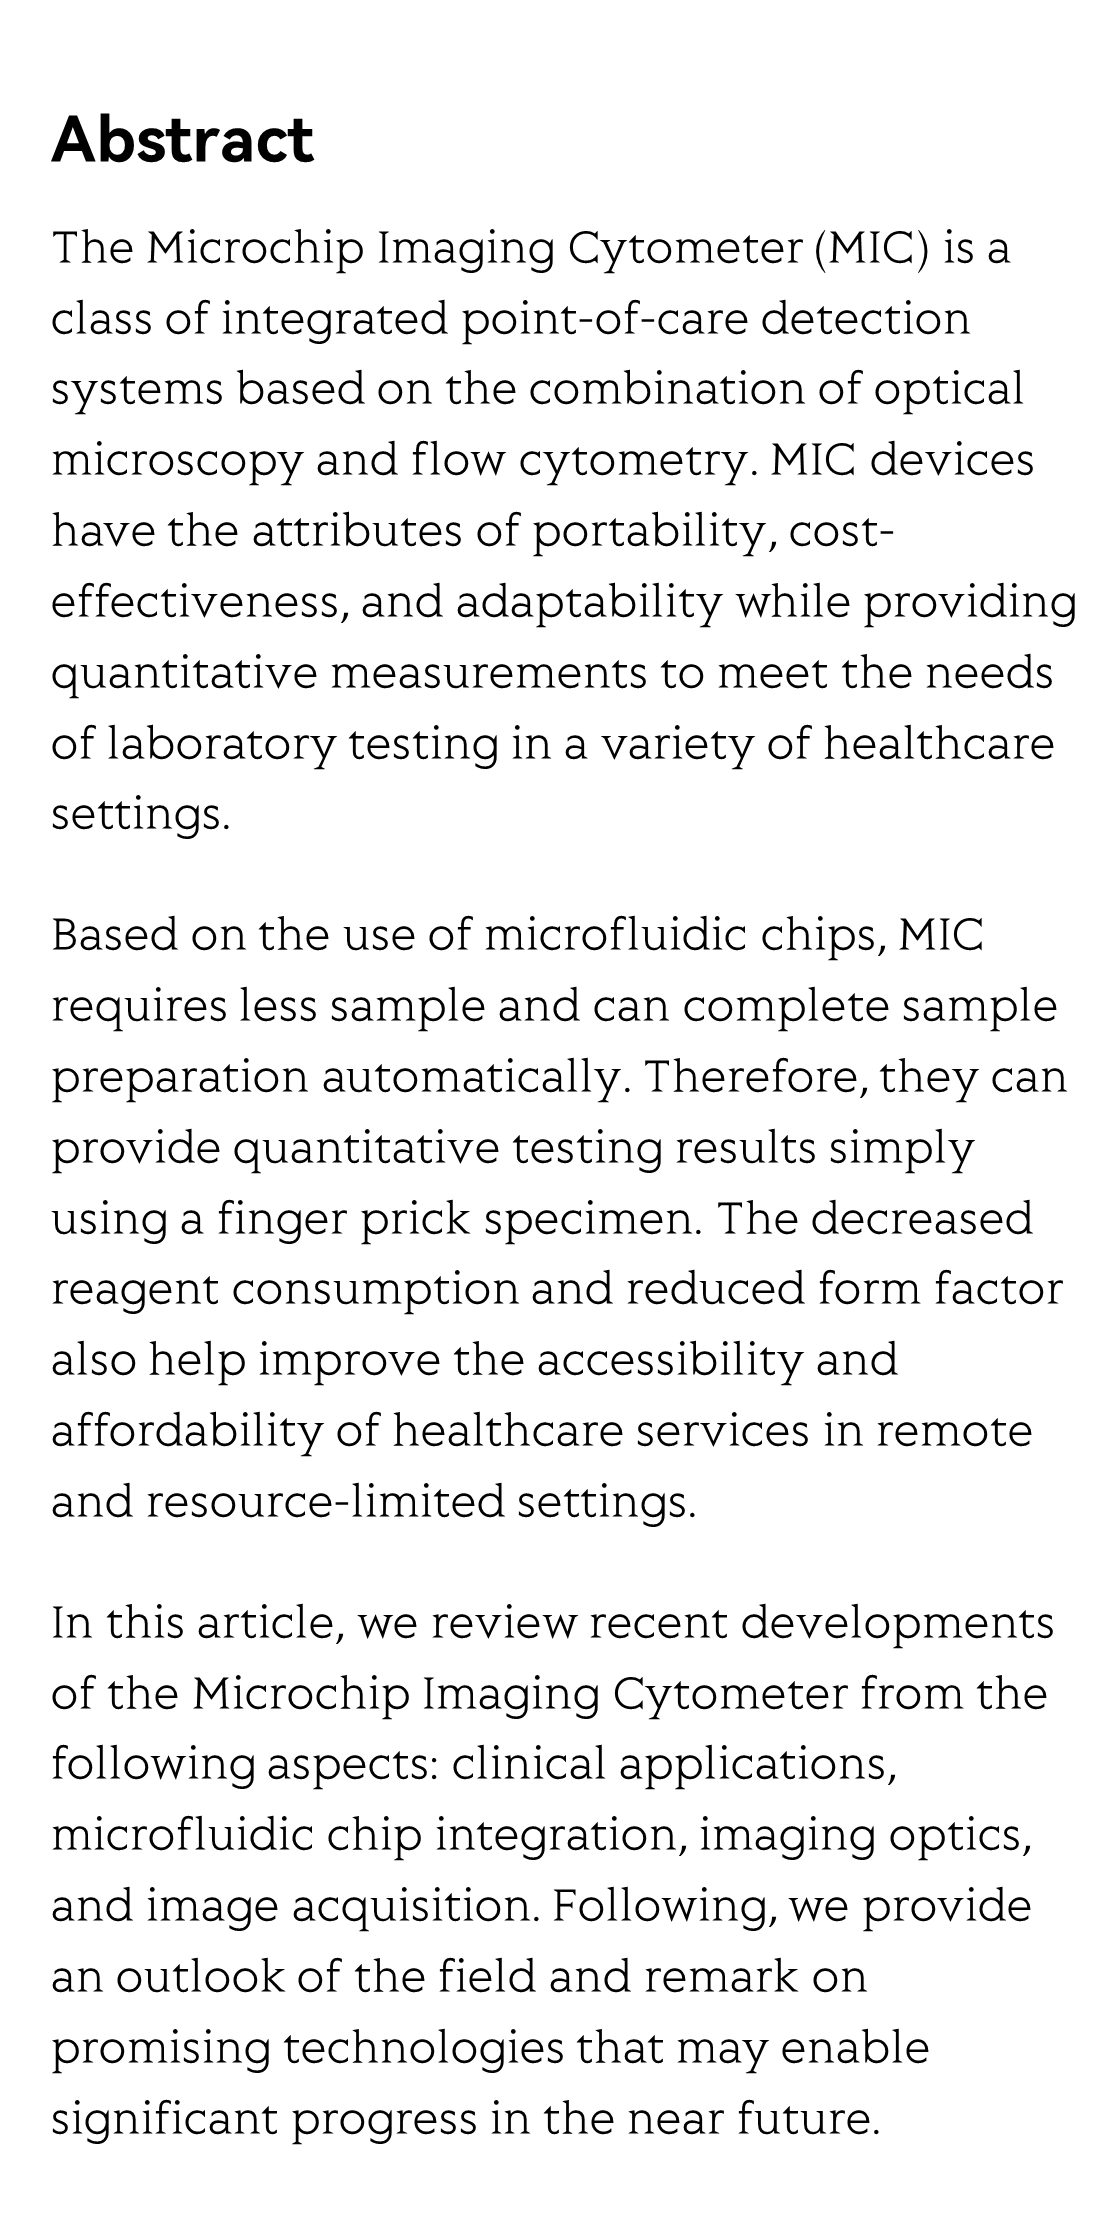 Microchip imaging cytometer: making healthcare available, accessible, and affordable_2